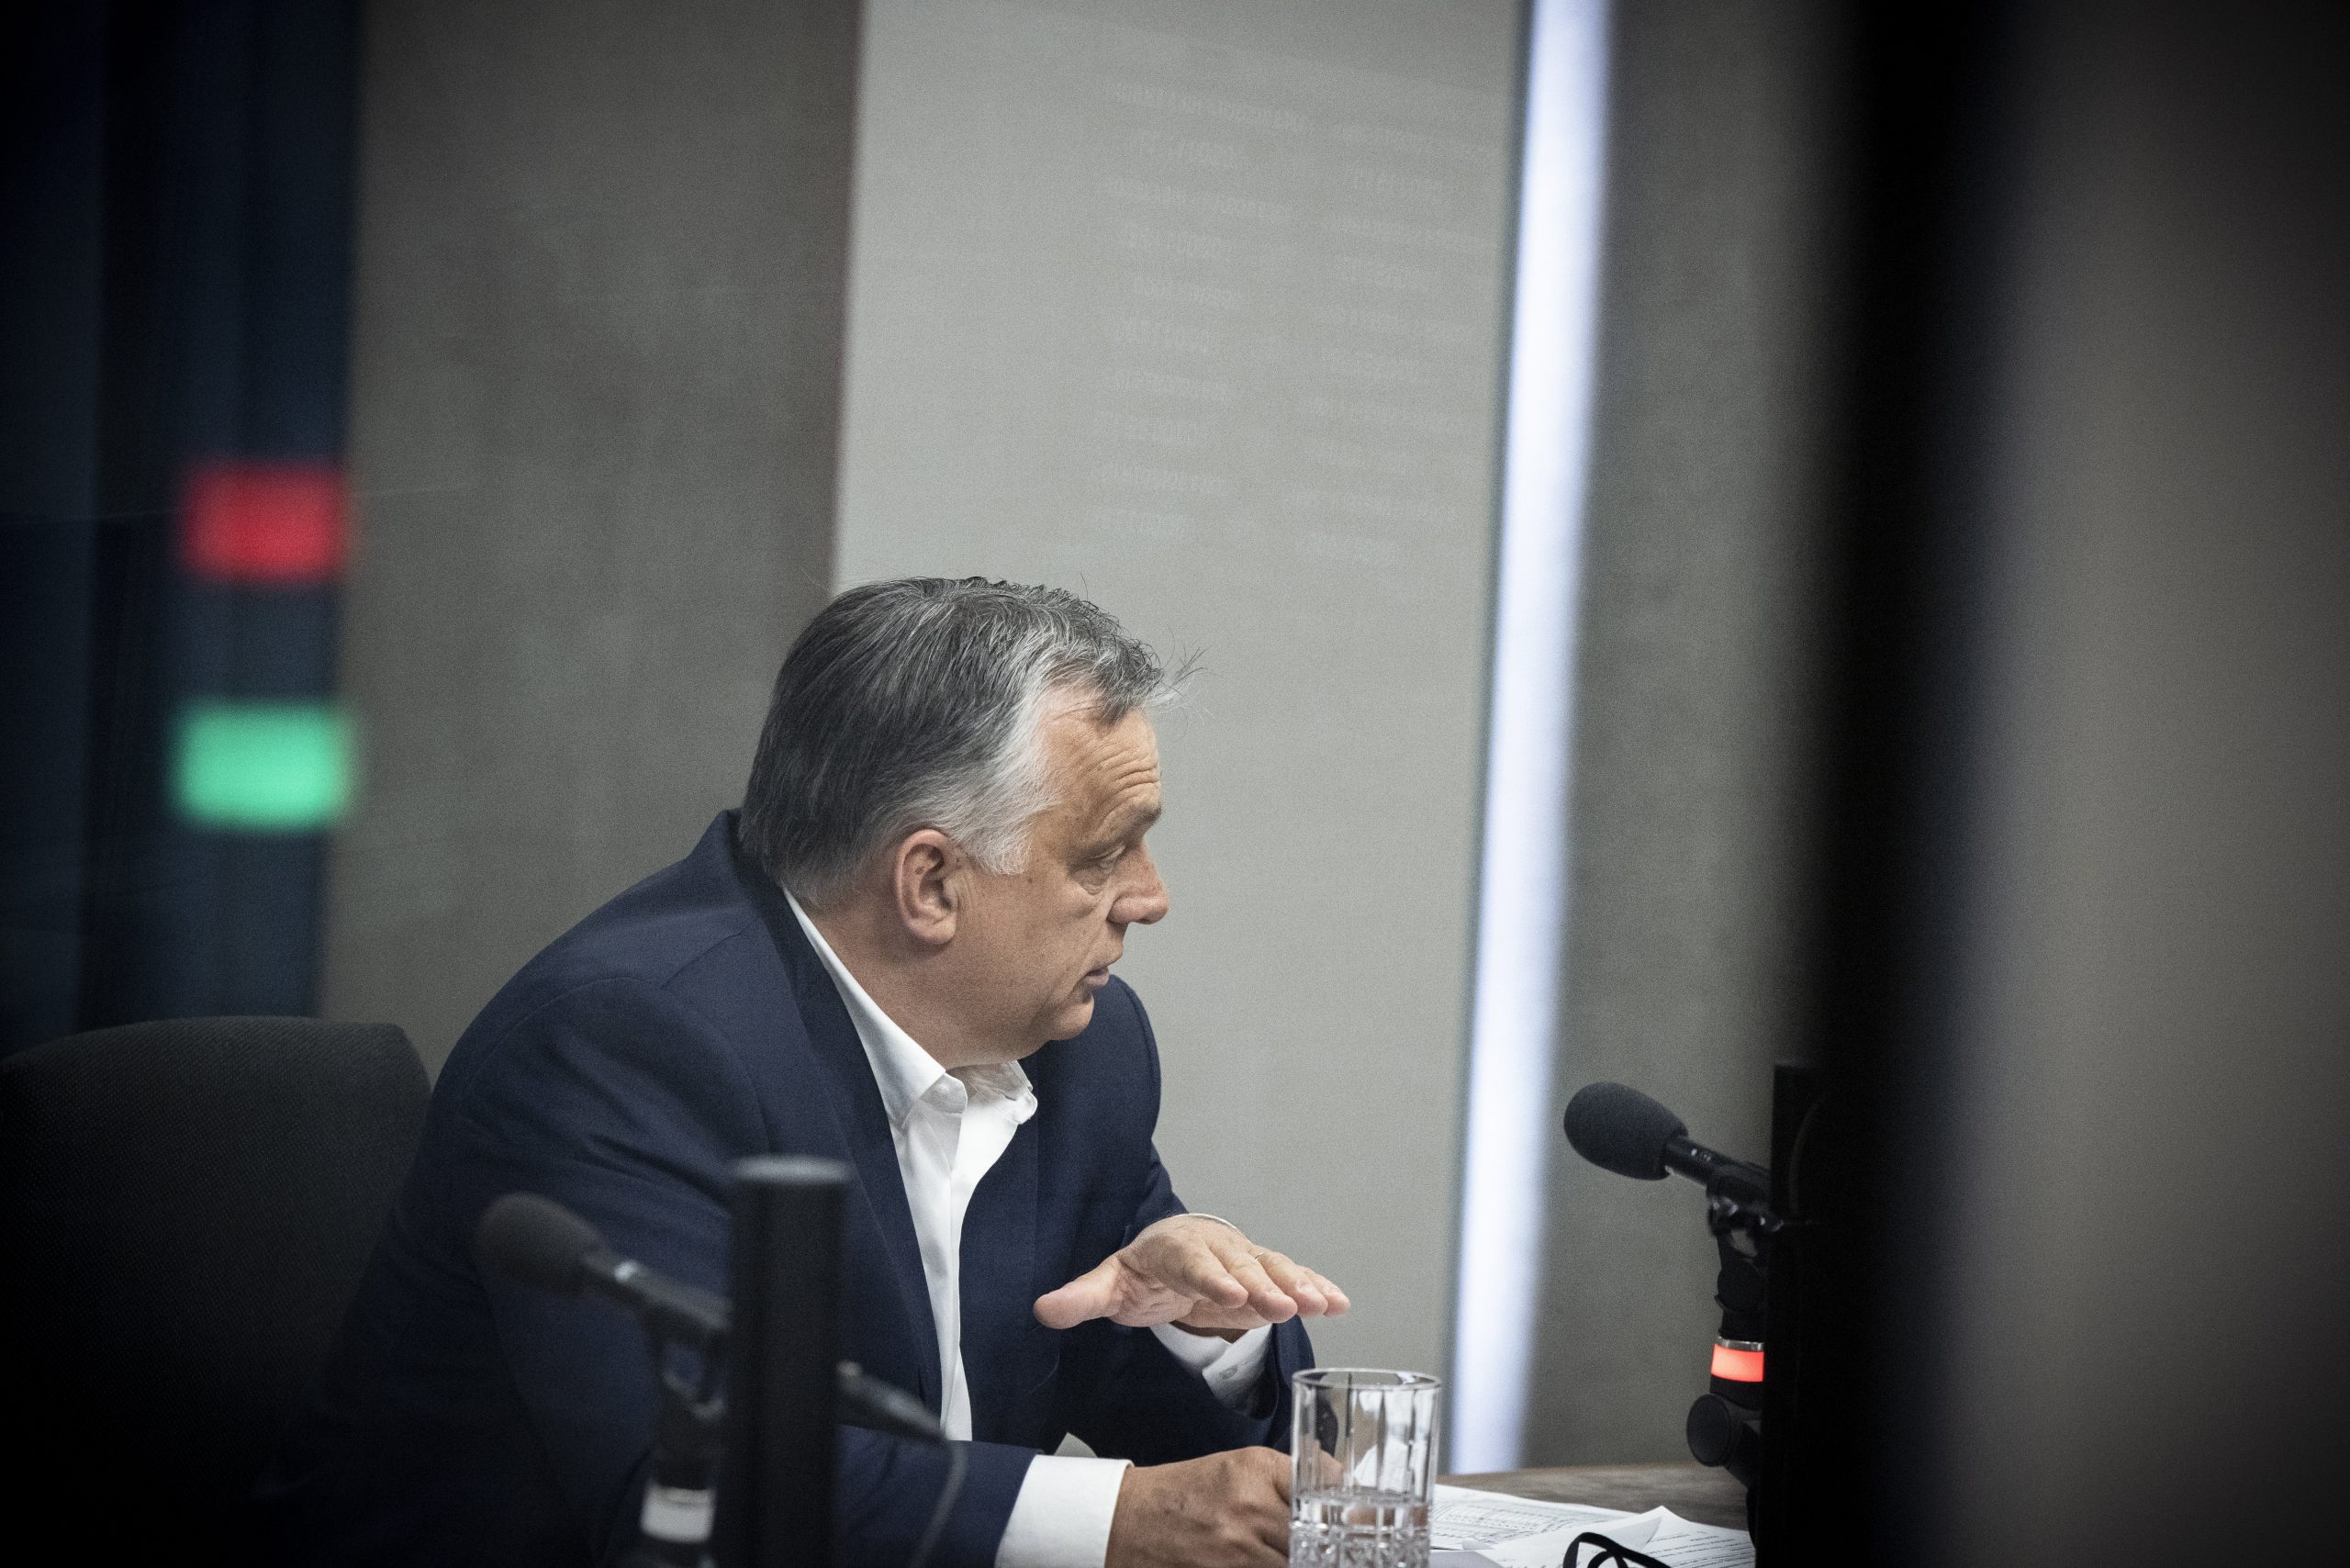 PM Orbán: Hungary Must Stick to Utility Price Cuts